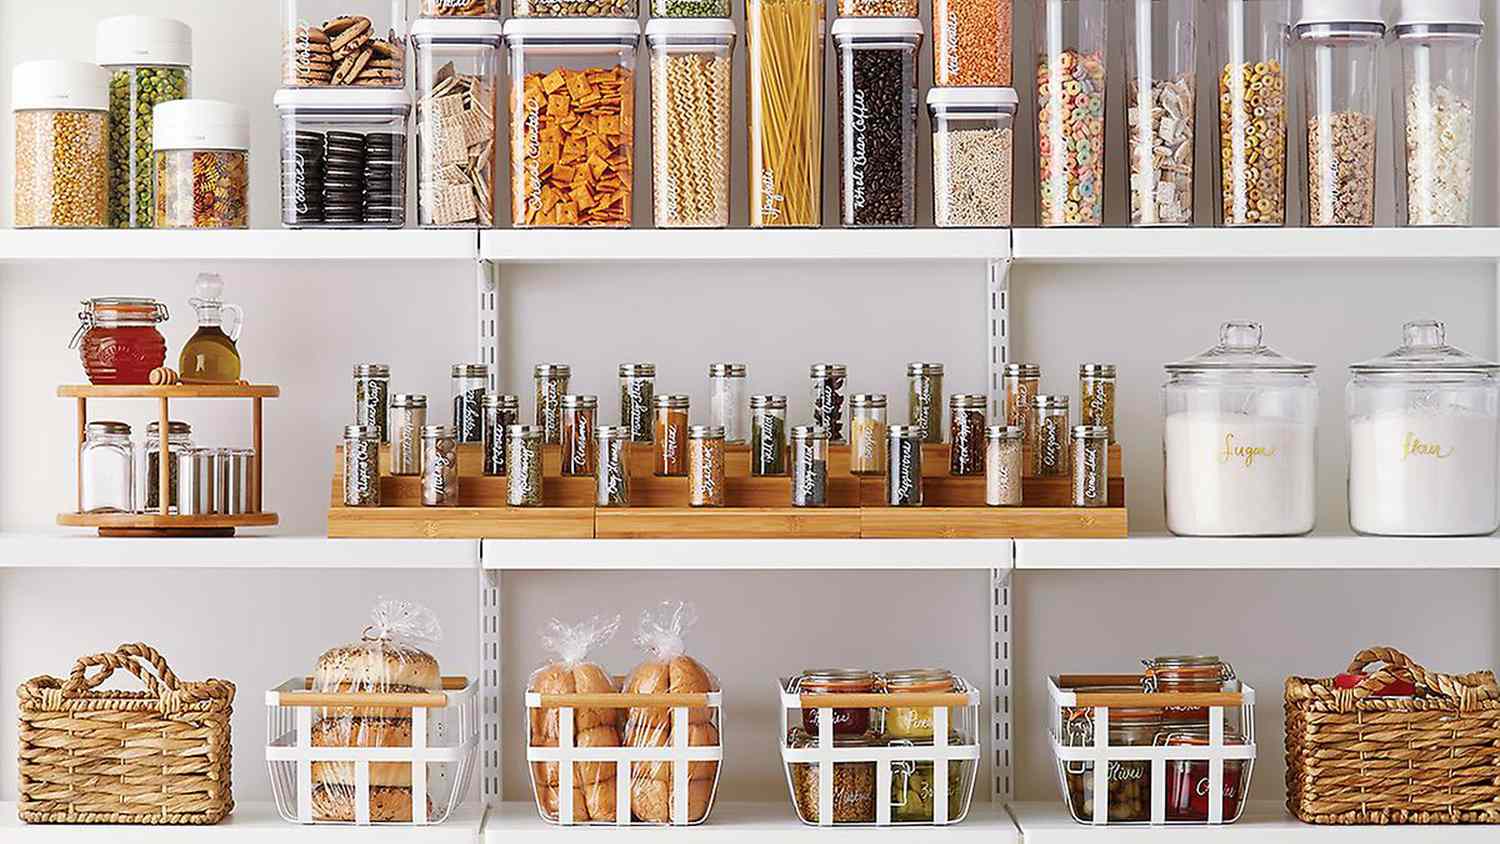 Ultimate Kitchen Storage Under Cabinet Spice Rack Holds 16 Large or 32 Small Spice Containers SR-02 Handmade Hardwood 